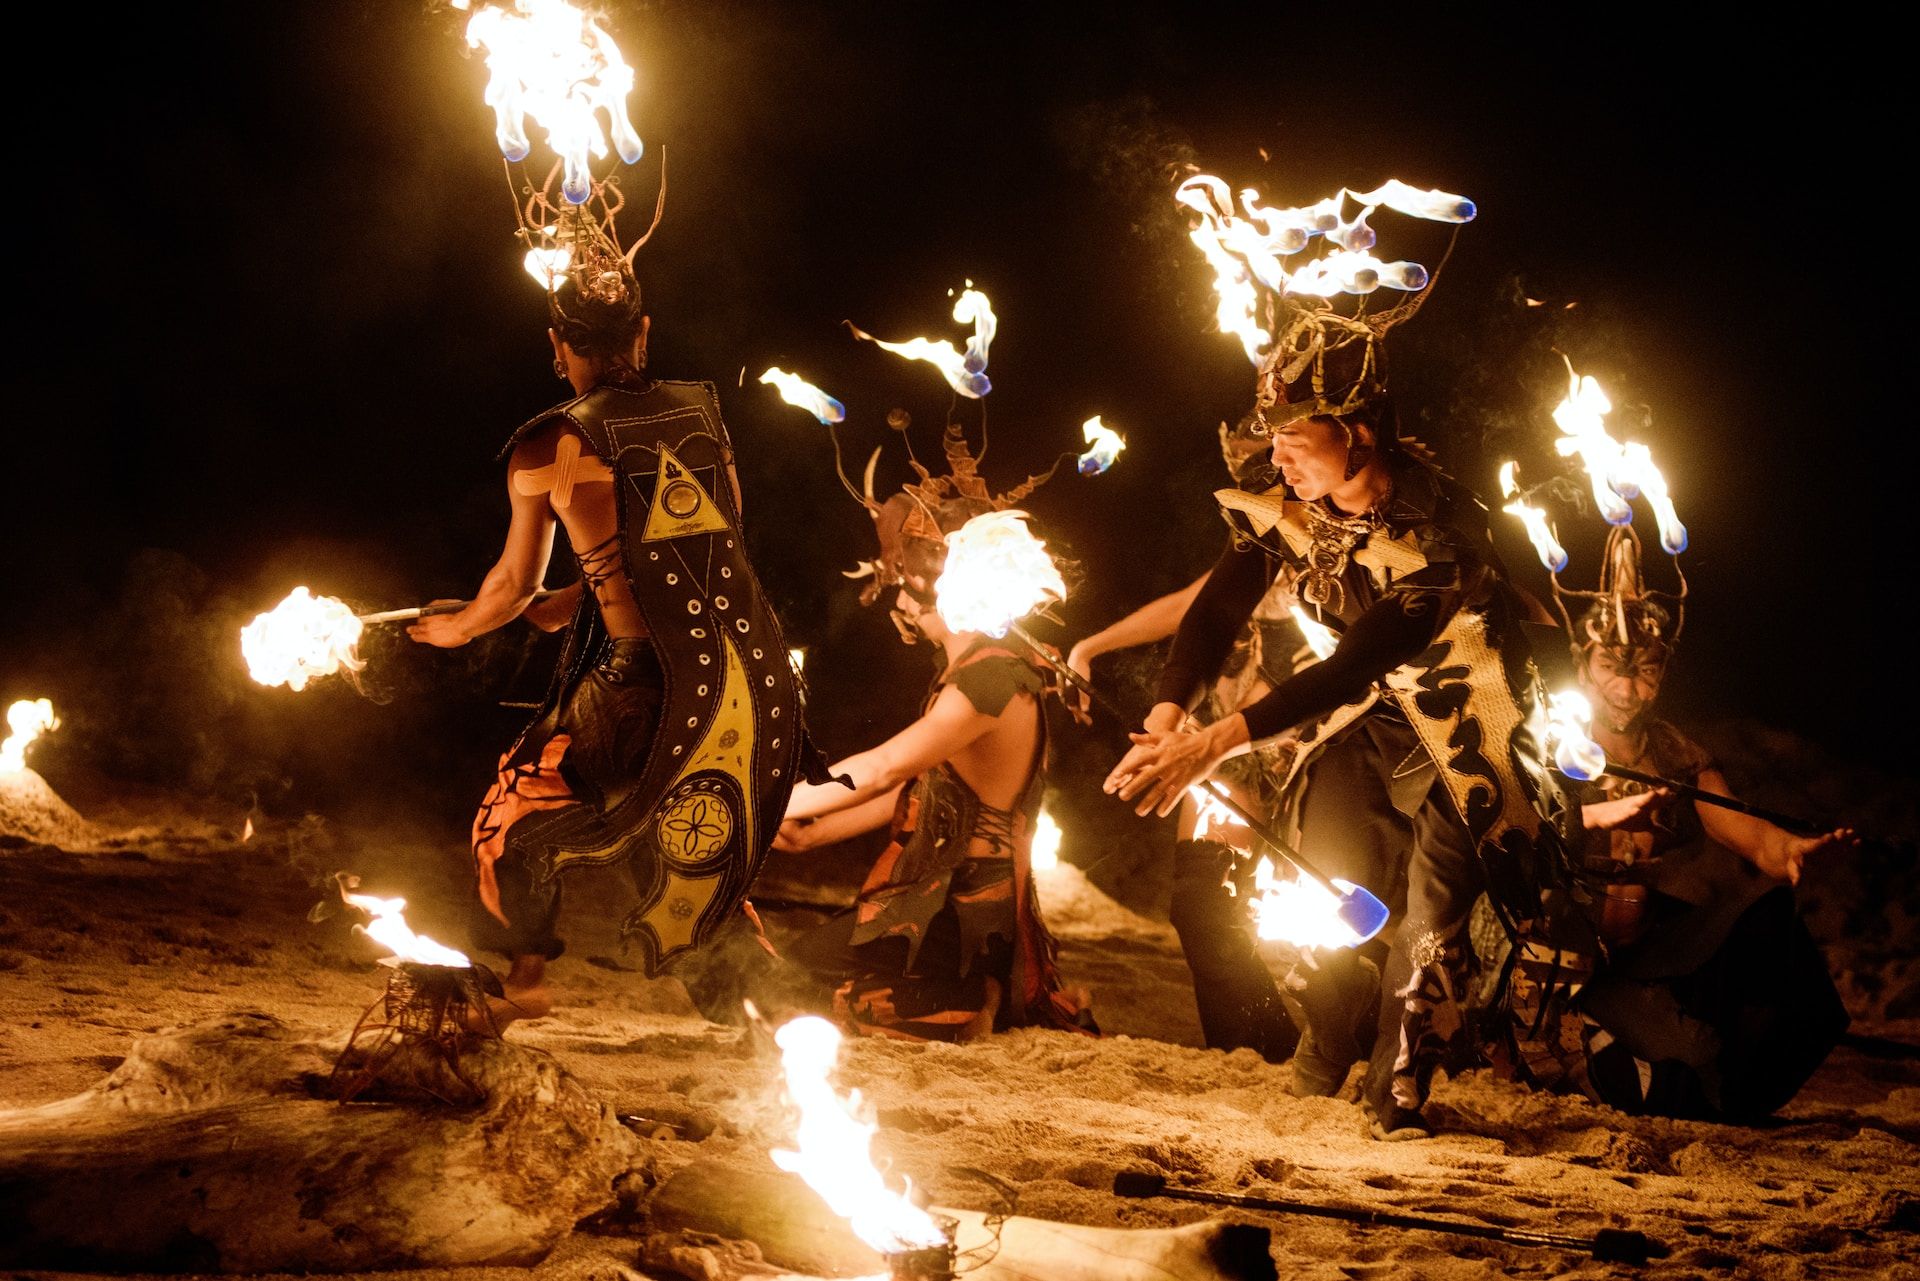 Fire dancers at night on the beach in Costa Rica